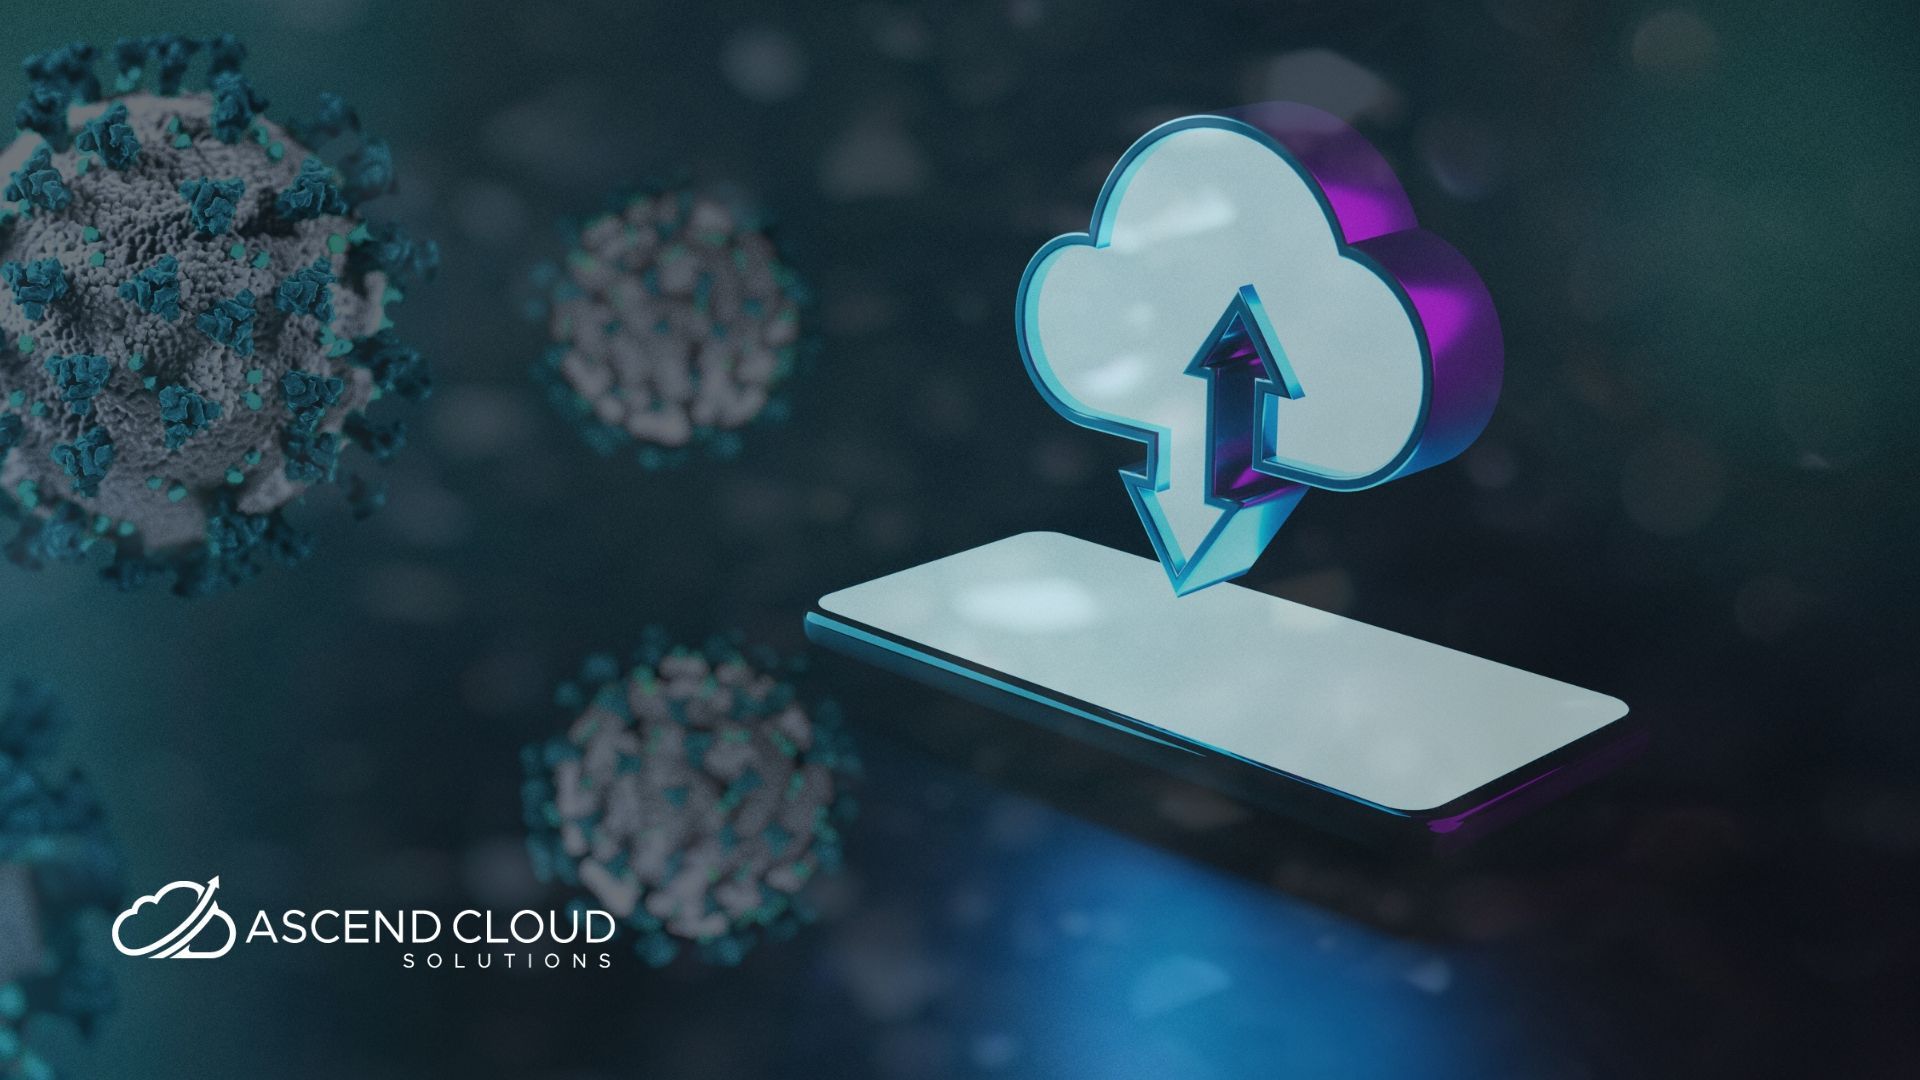 From cloud storage to e-learning, the COVID-19 pandemic led to a massive increase in cloud usage. Discover what this means for now – and the future.